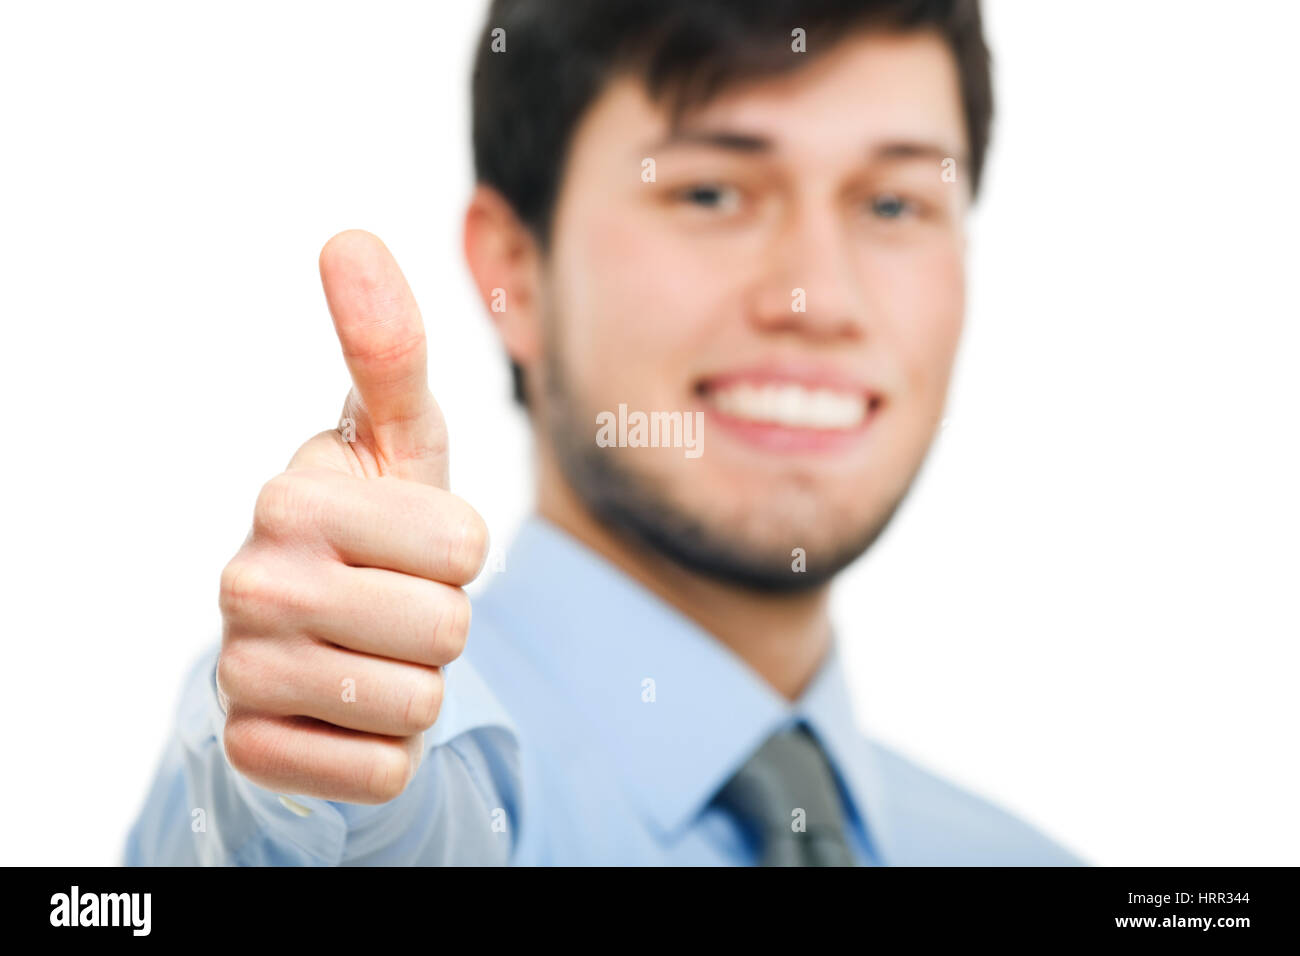 Smiling business man thumbs up isolated on white Stock Photo